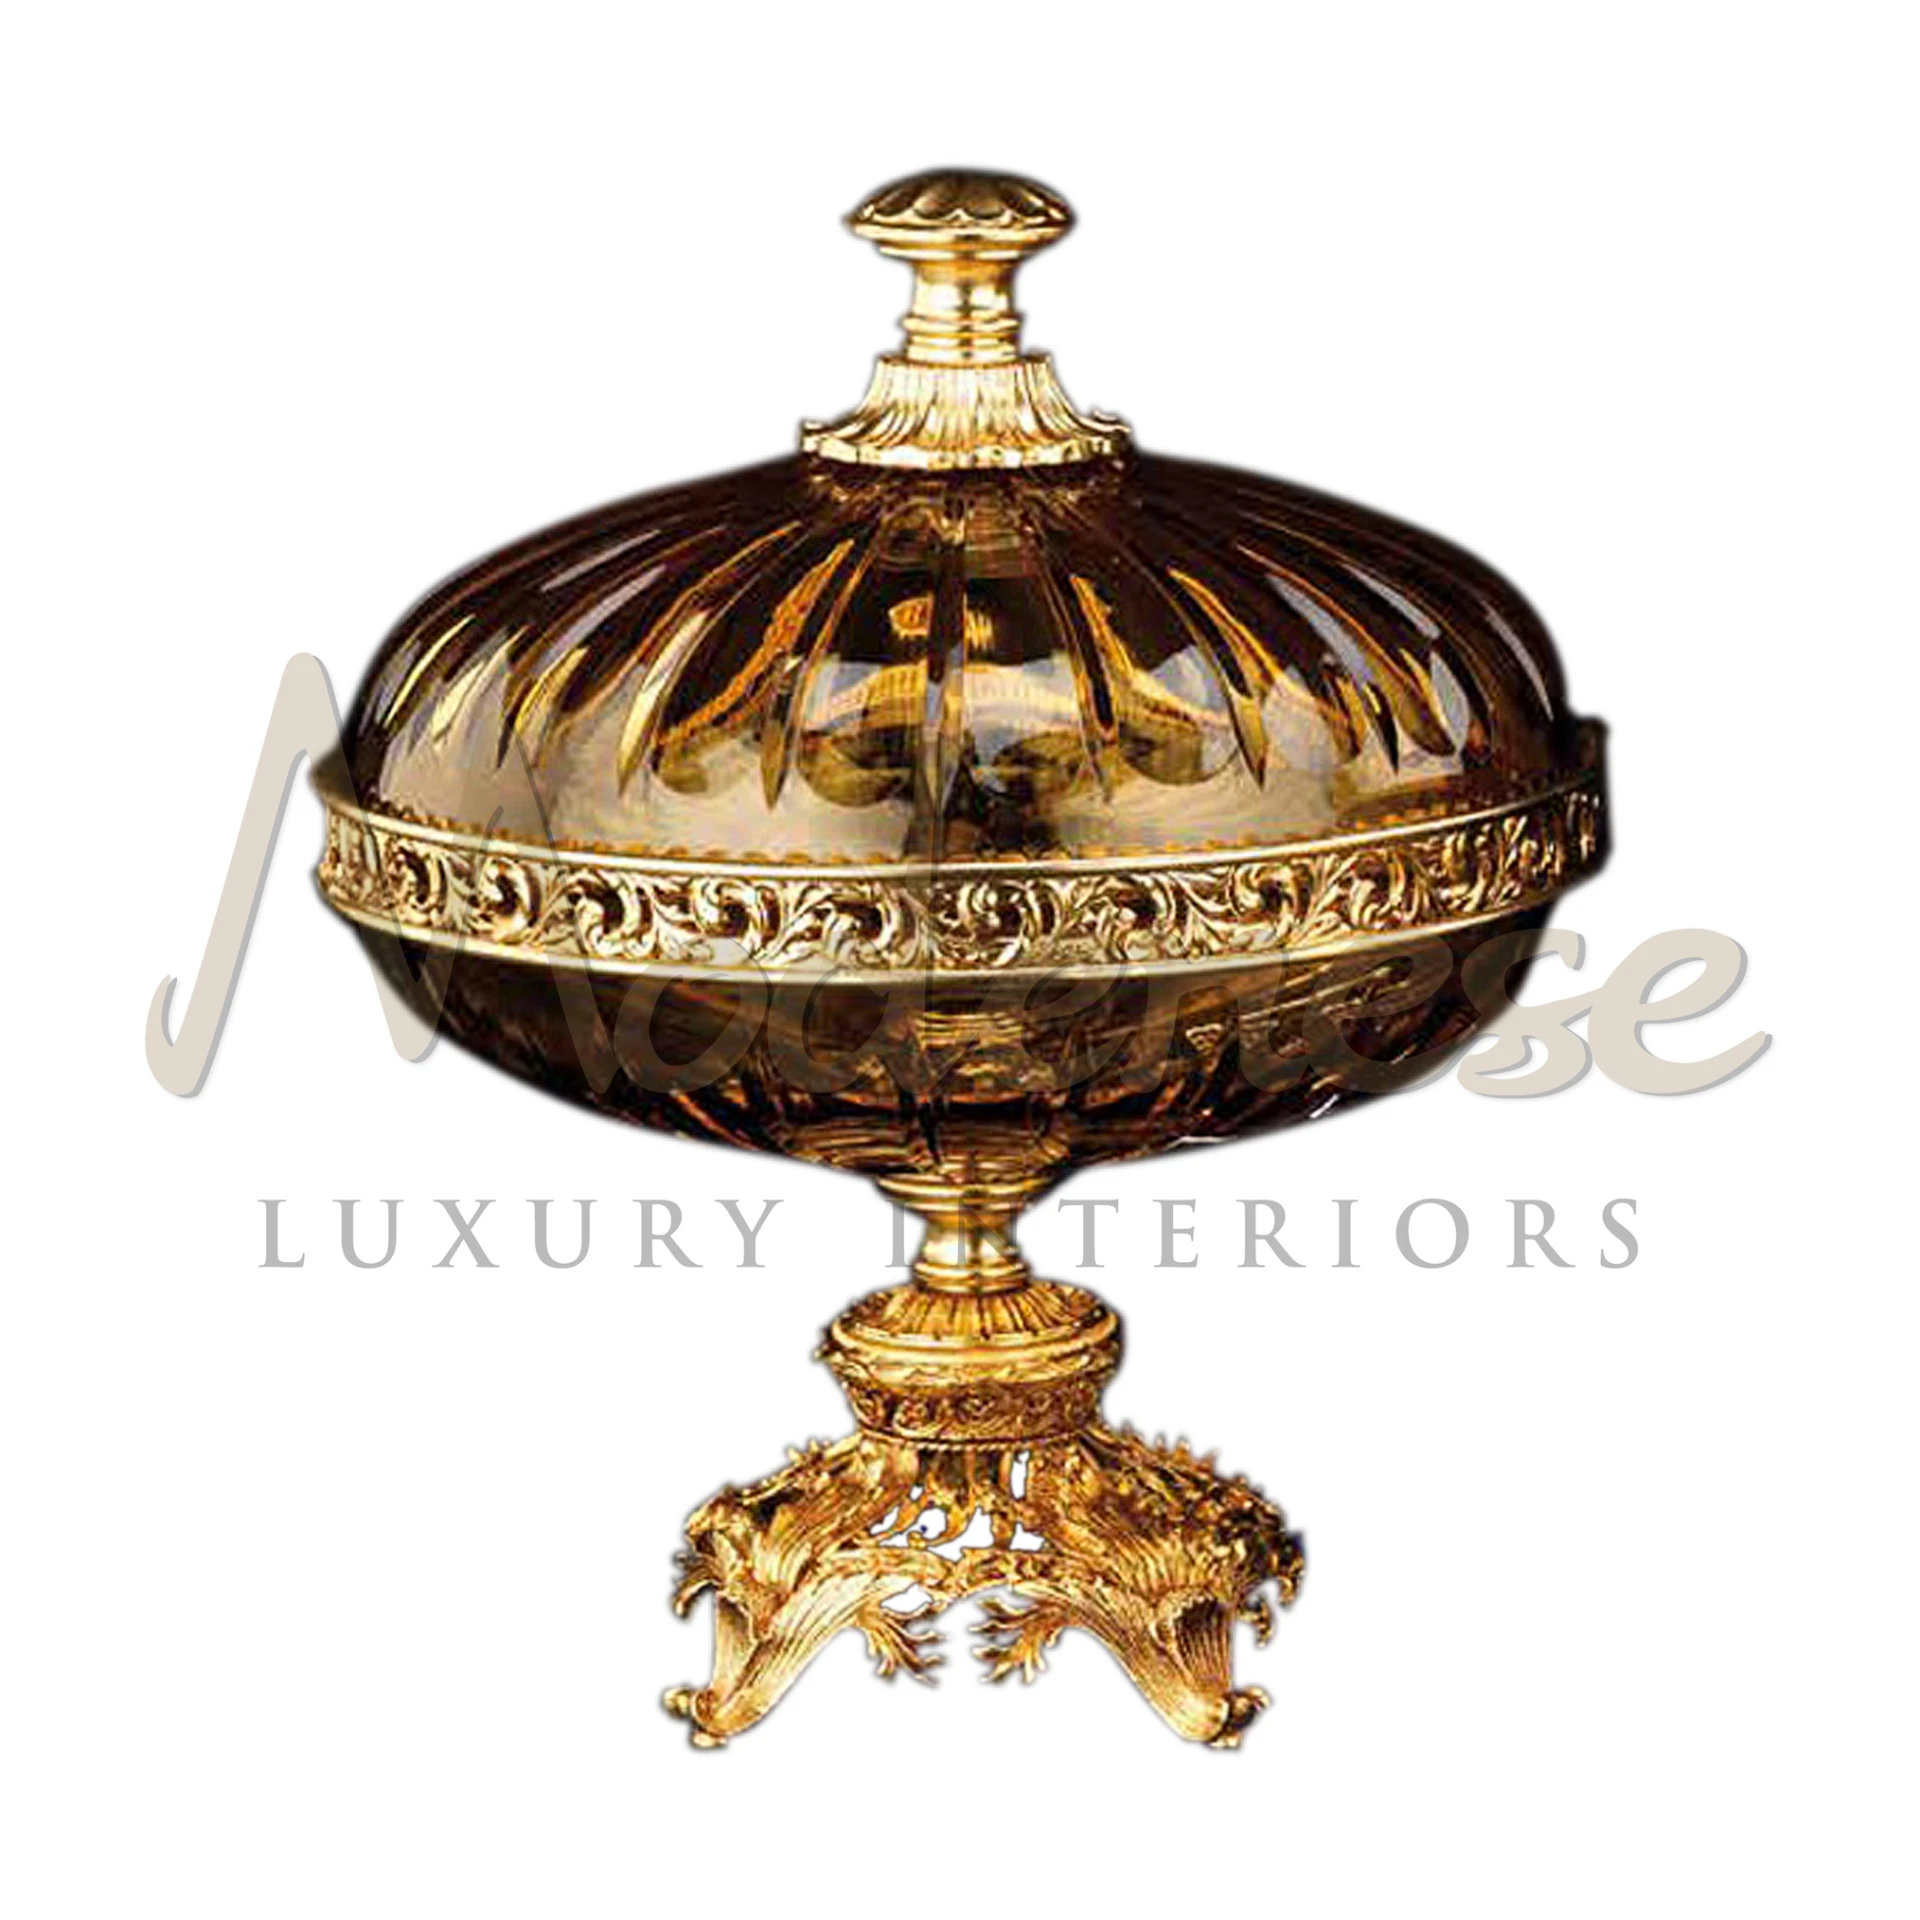 Luxurious Royal Crystal Vase, handcrafted for regal elegance, suited for luxury interior design in classic and baroque styles.






